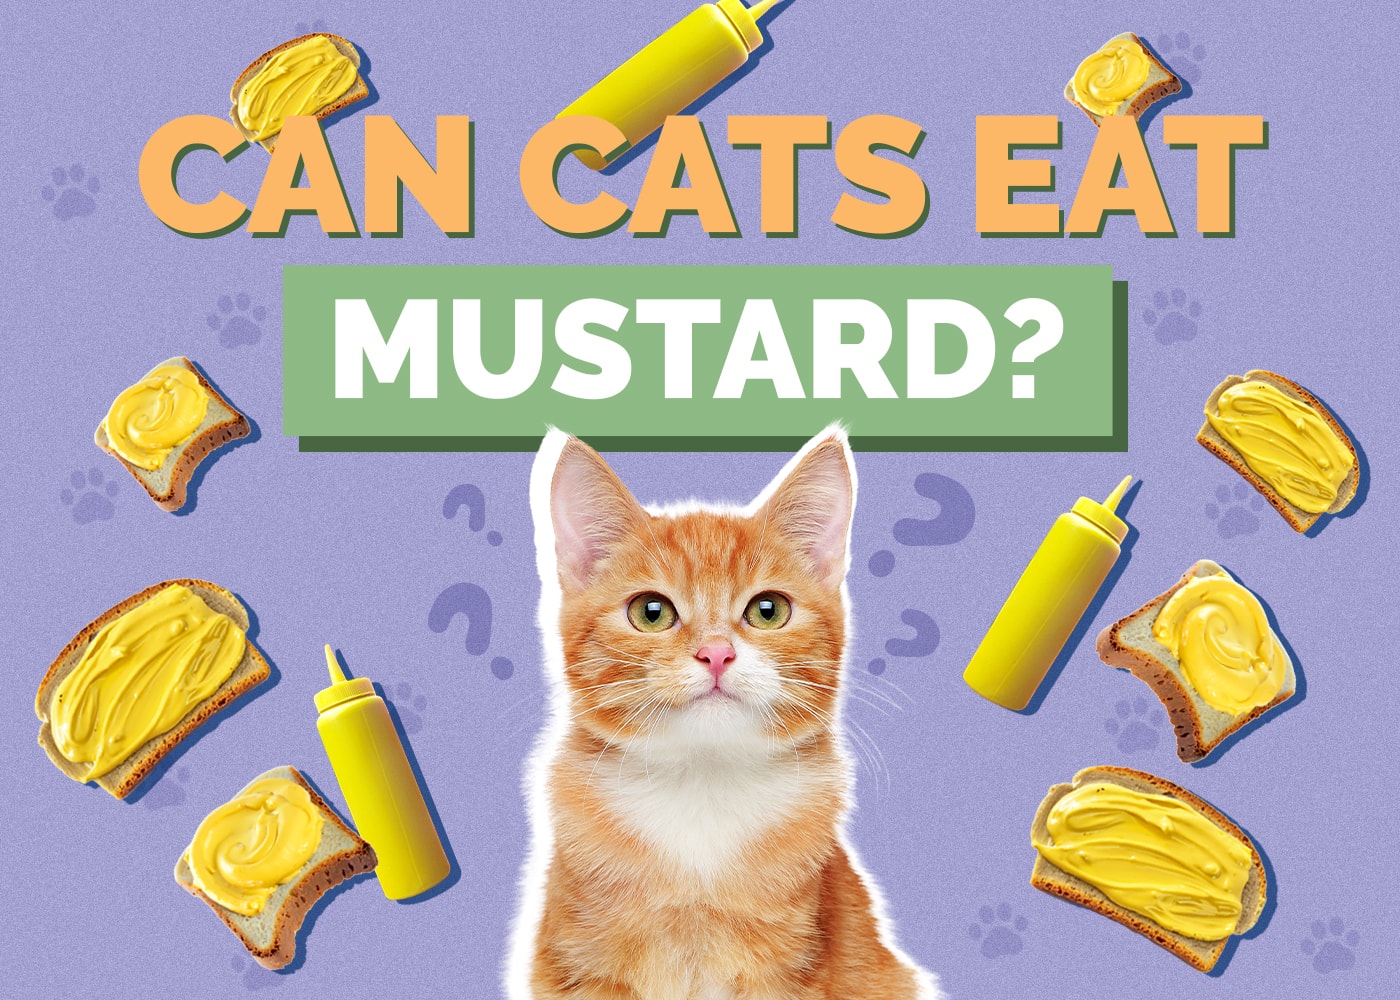 Can Cats Eat mustard